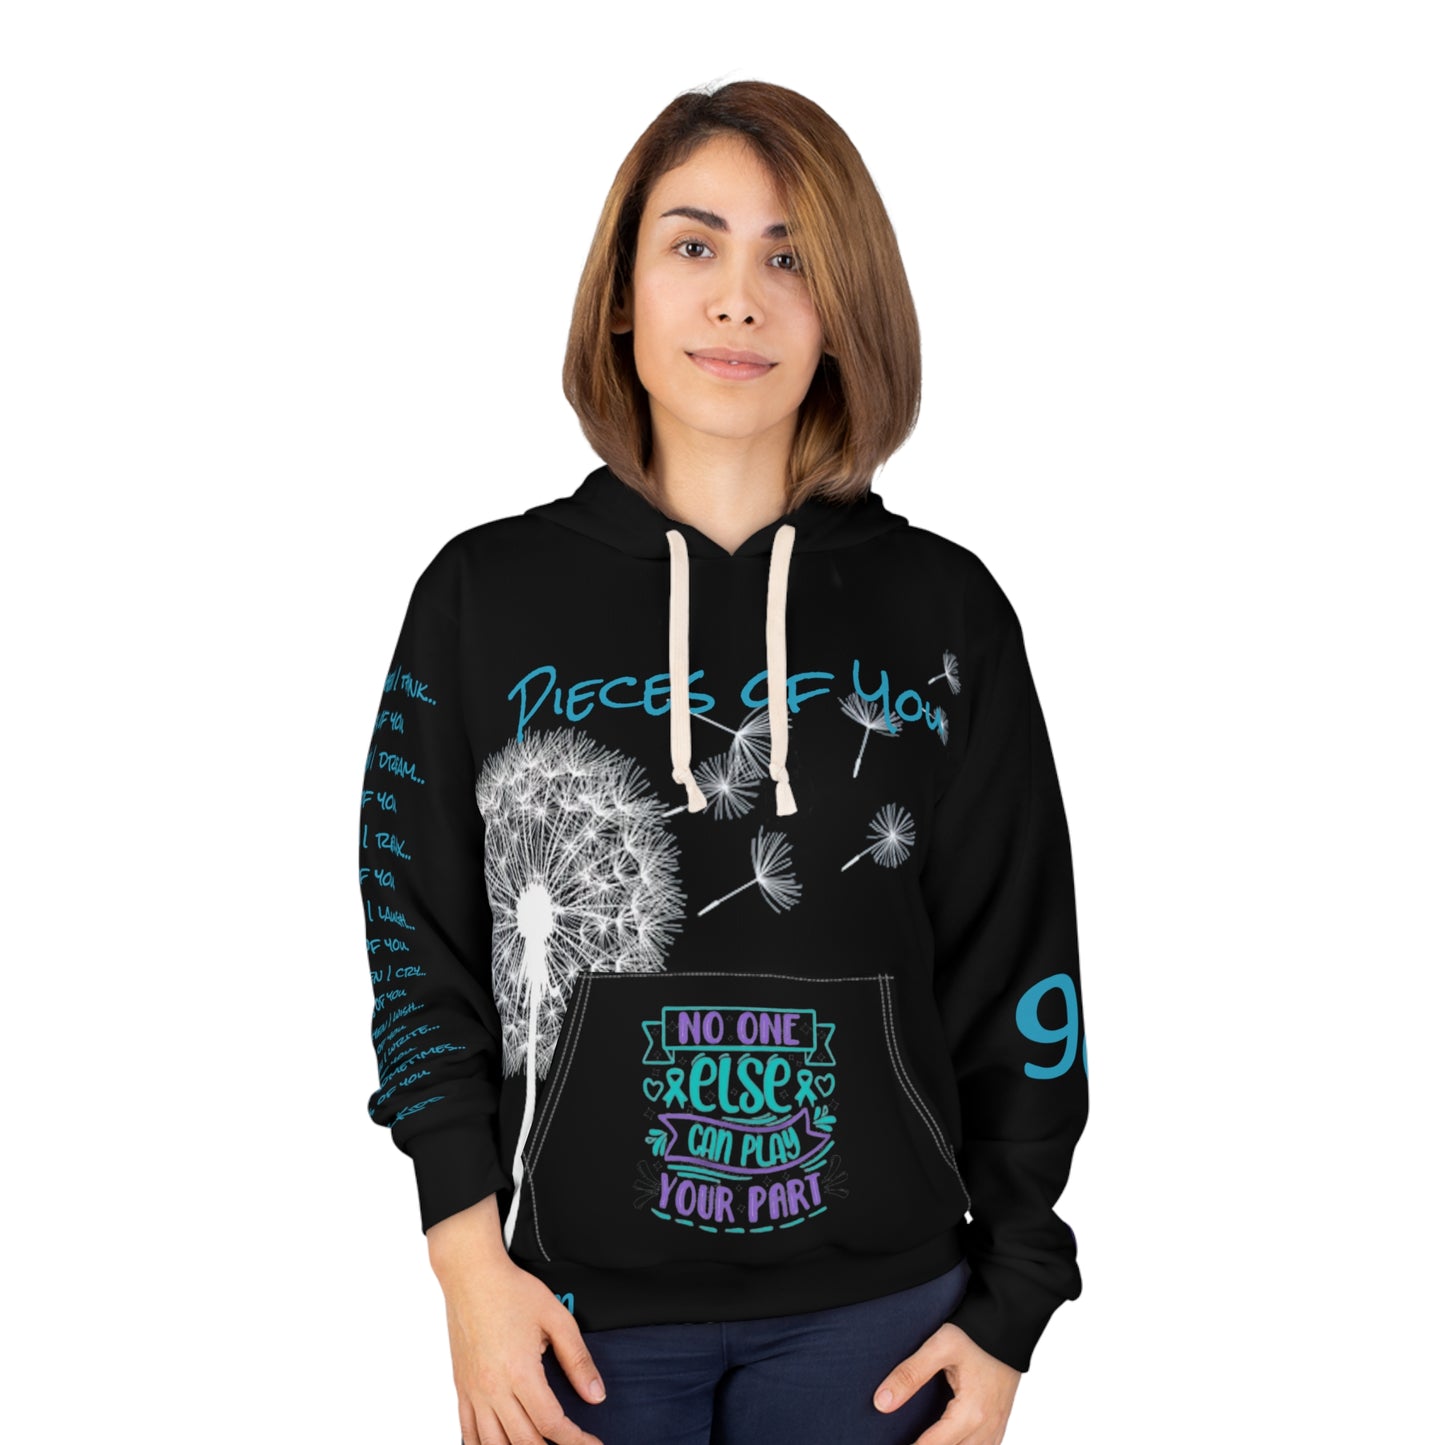 Awareness - Suicide 988 Prevention - Pieces Of You - Unisex Pullover Hoodie (AOP)